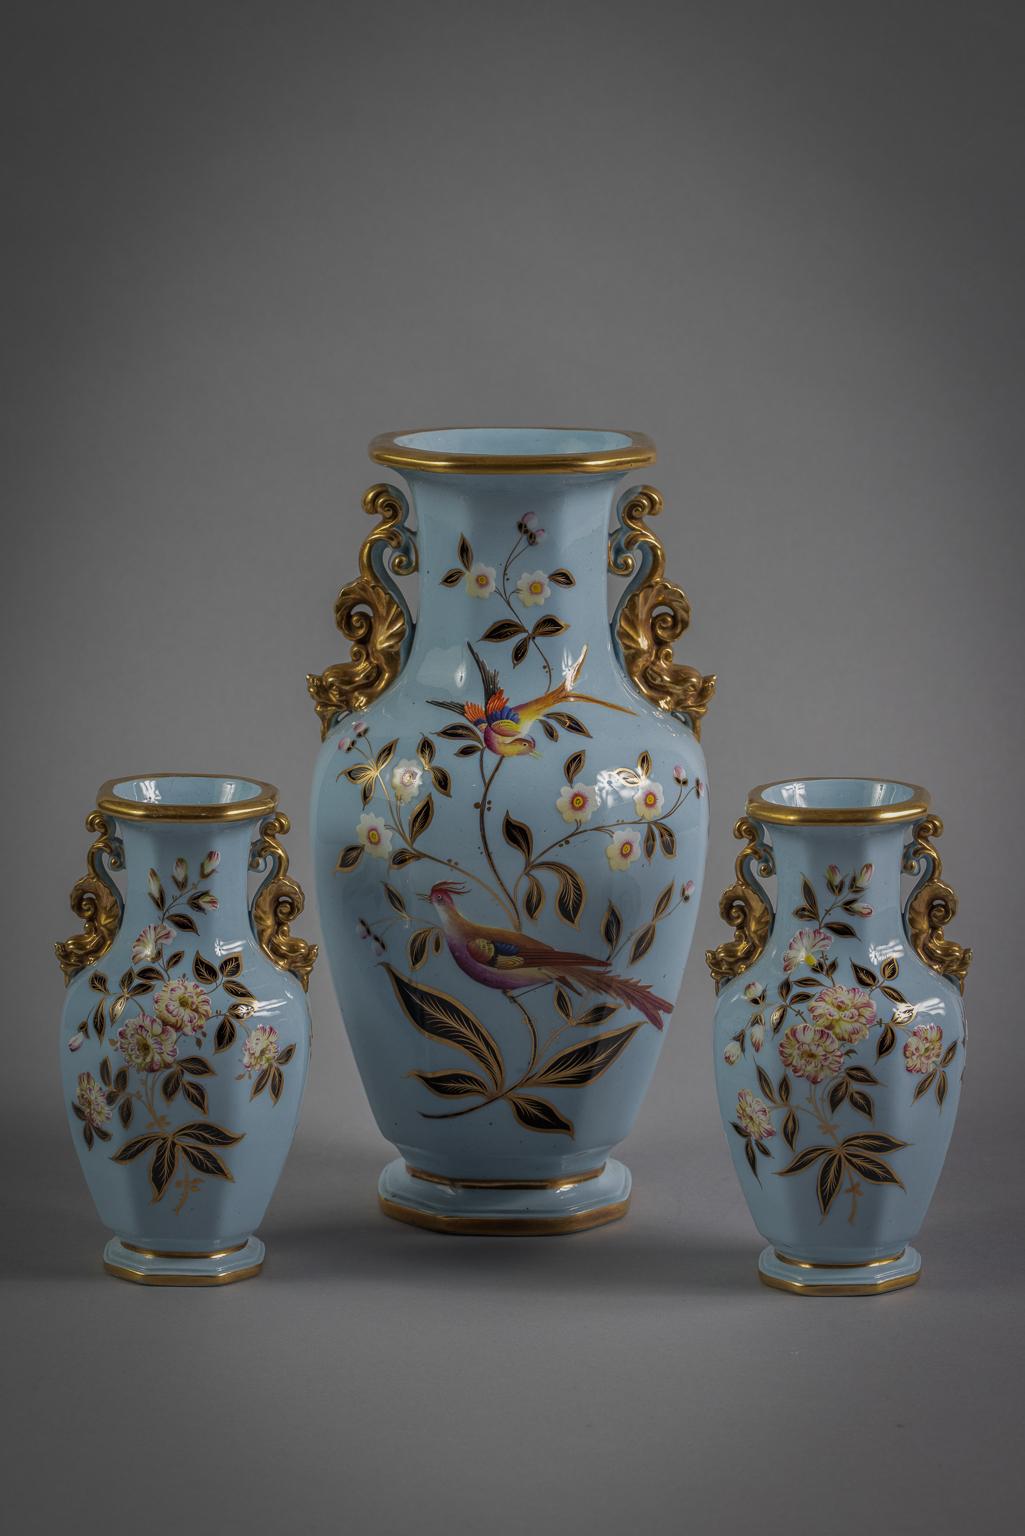 With gilt scroll handles terminating with a fierce foo dog mask, the central vase with perched birds on an aqua blue ground, the smaller pair similarly decorated minus the birds. Dimension of smaller vases: Height 6.25